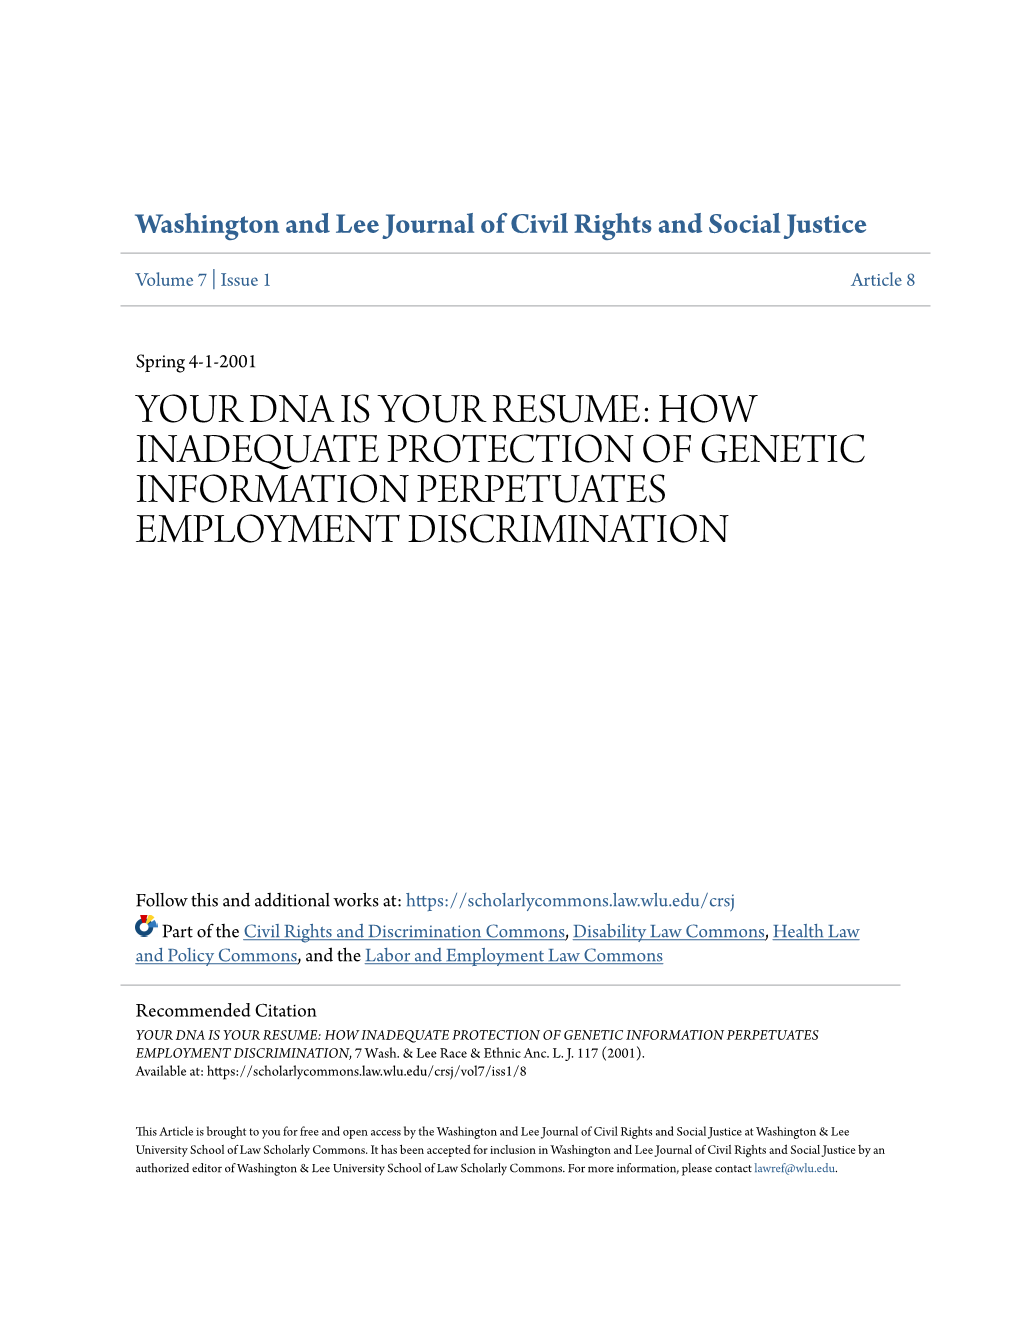 Your Dna Is Your Resume: How Inadequate Protection of Genetic Information Perpetuates Employment Discrimination